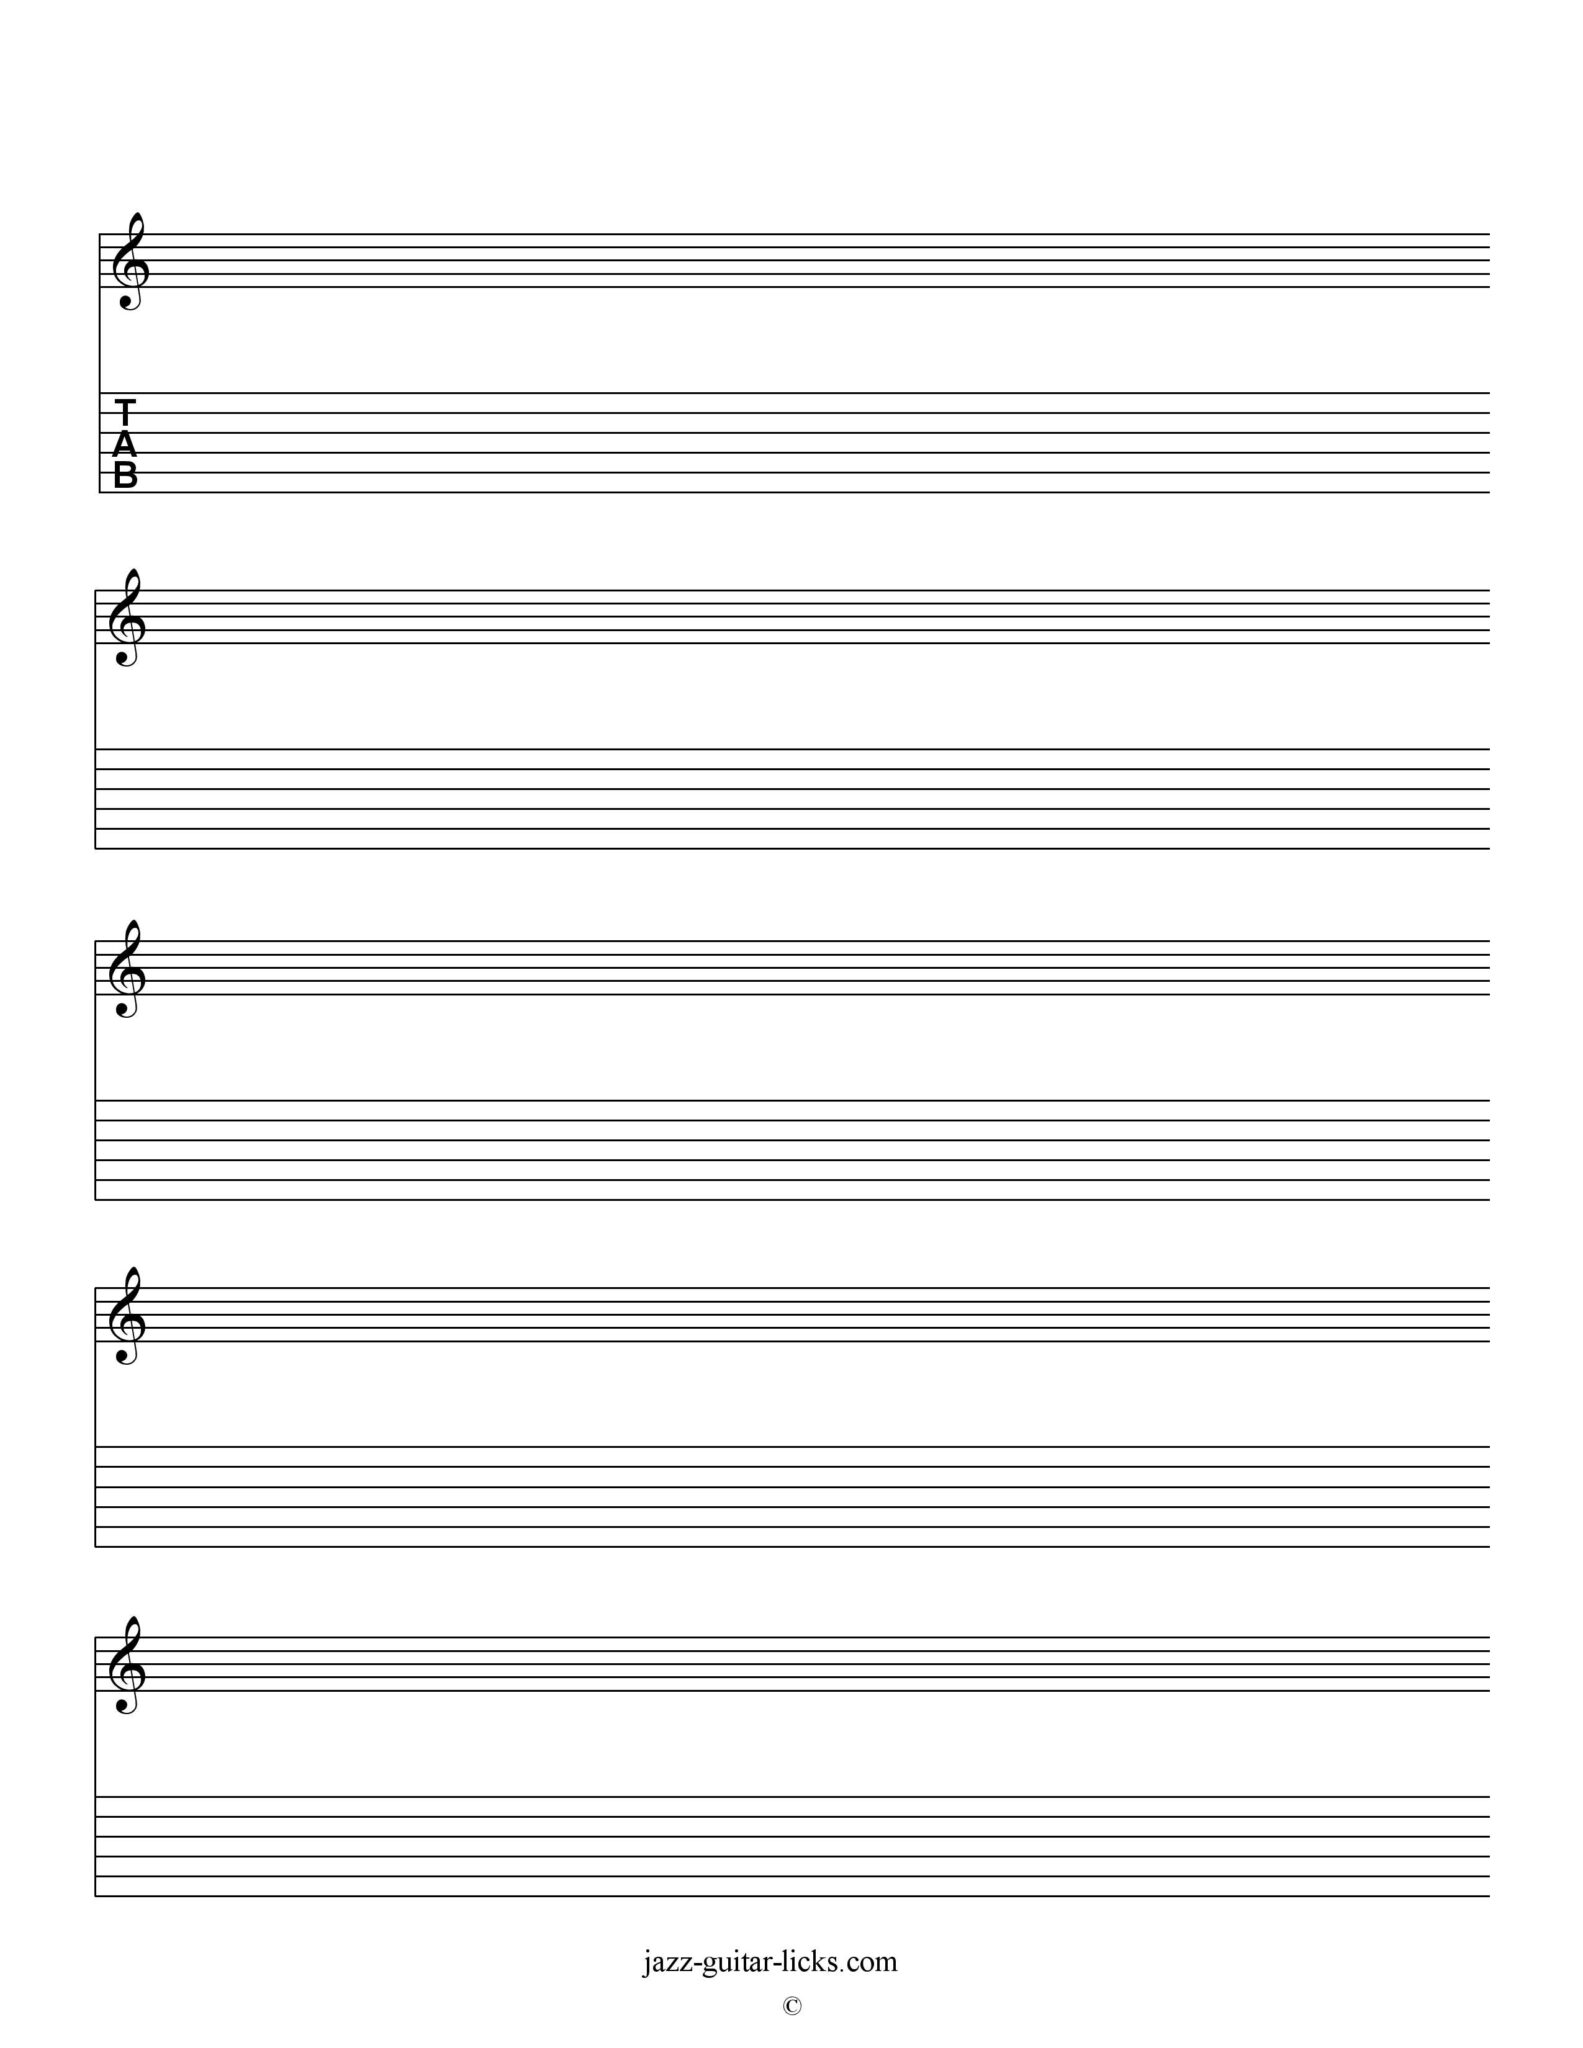 printable-blank-staves-and-tabs-free-music-sheet-jazz-throughout-blank-sheet-music-template